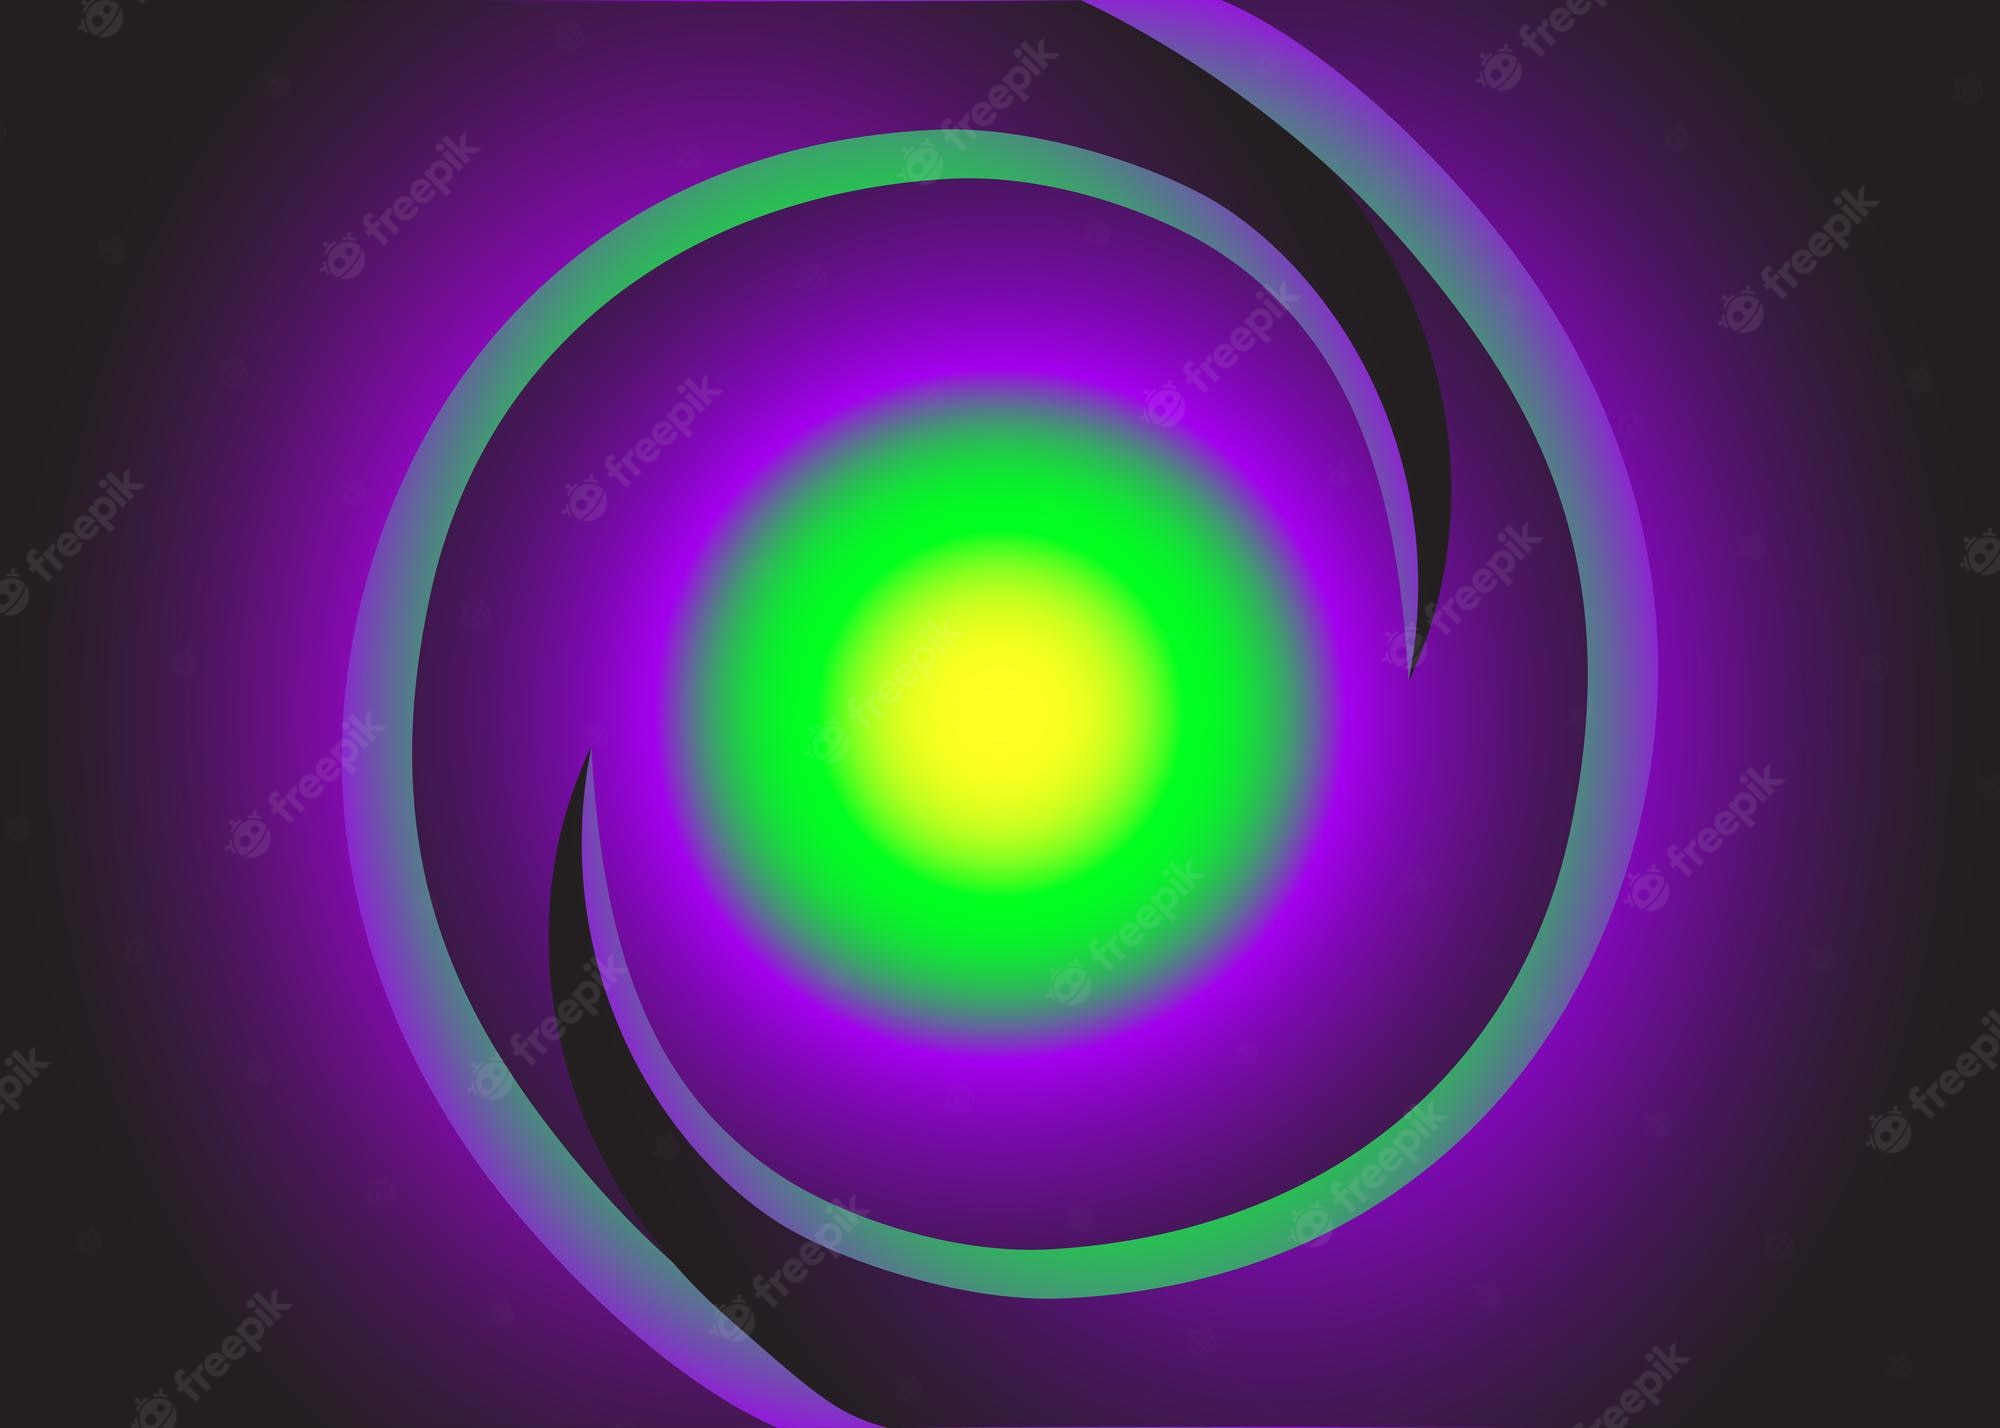 Premium Vector. Beautiful dark green energy power core with purple cover vector wallpaper or background